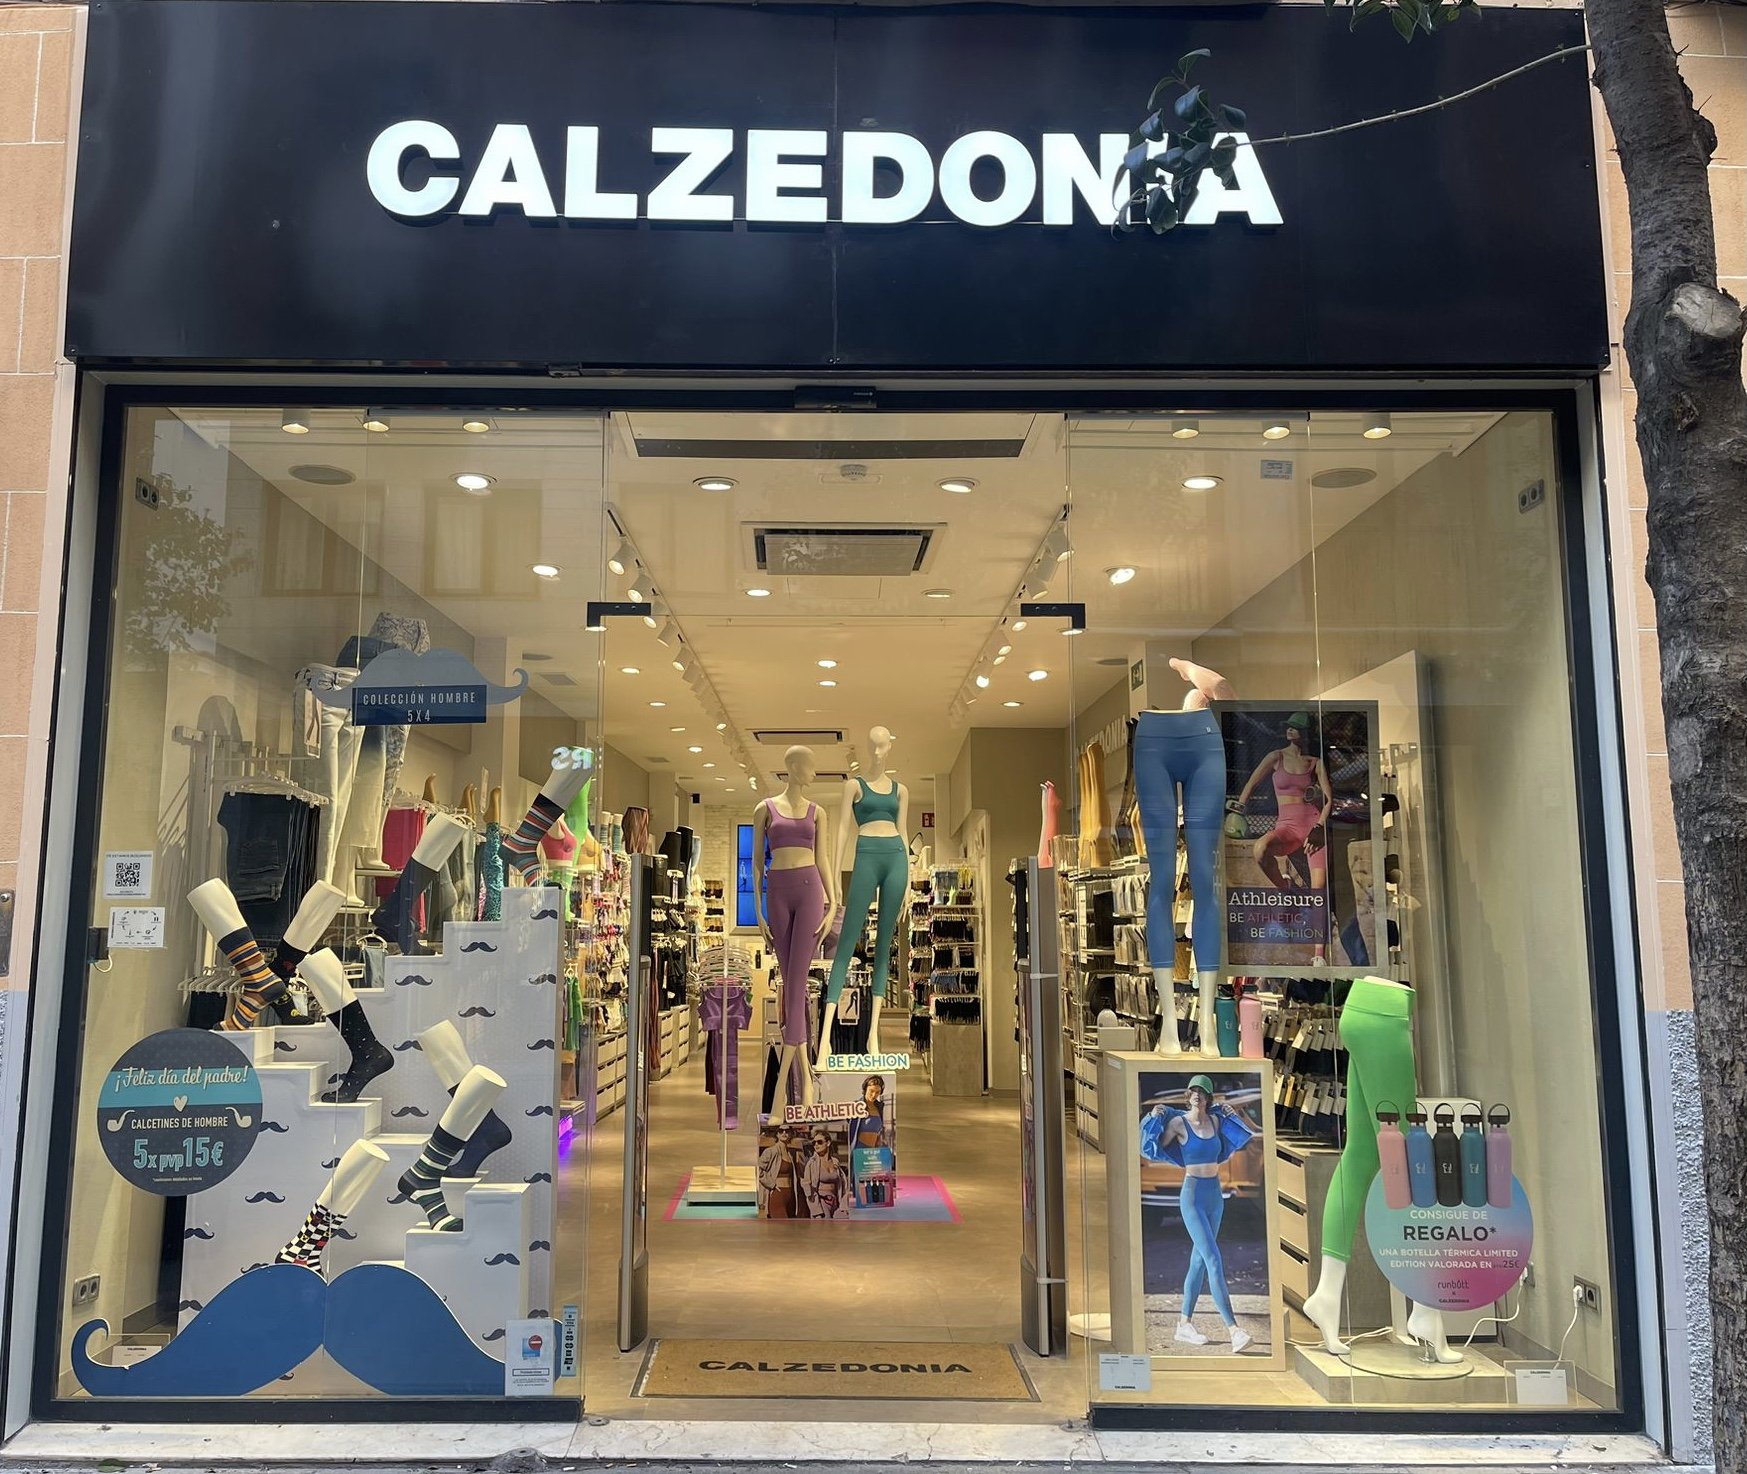 https://www.calzedonia.com/on/demandware.static/-/Library-Sites-CalzedoniaContentLibrary/default/dw2c0295f0/storeImages/CLZ_B9X_001.jpg